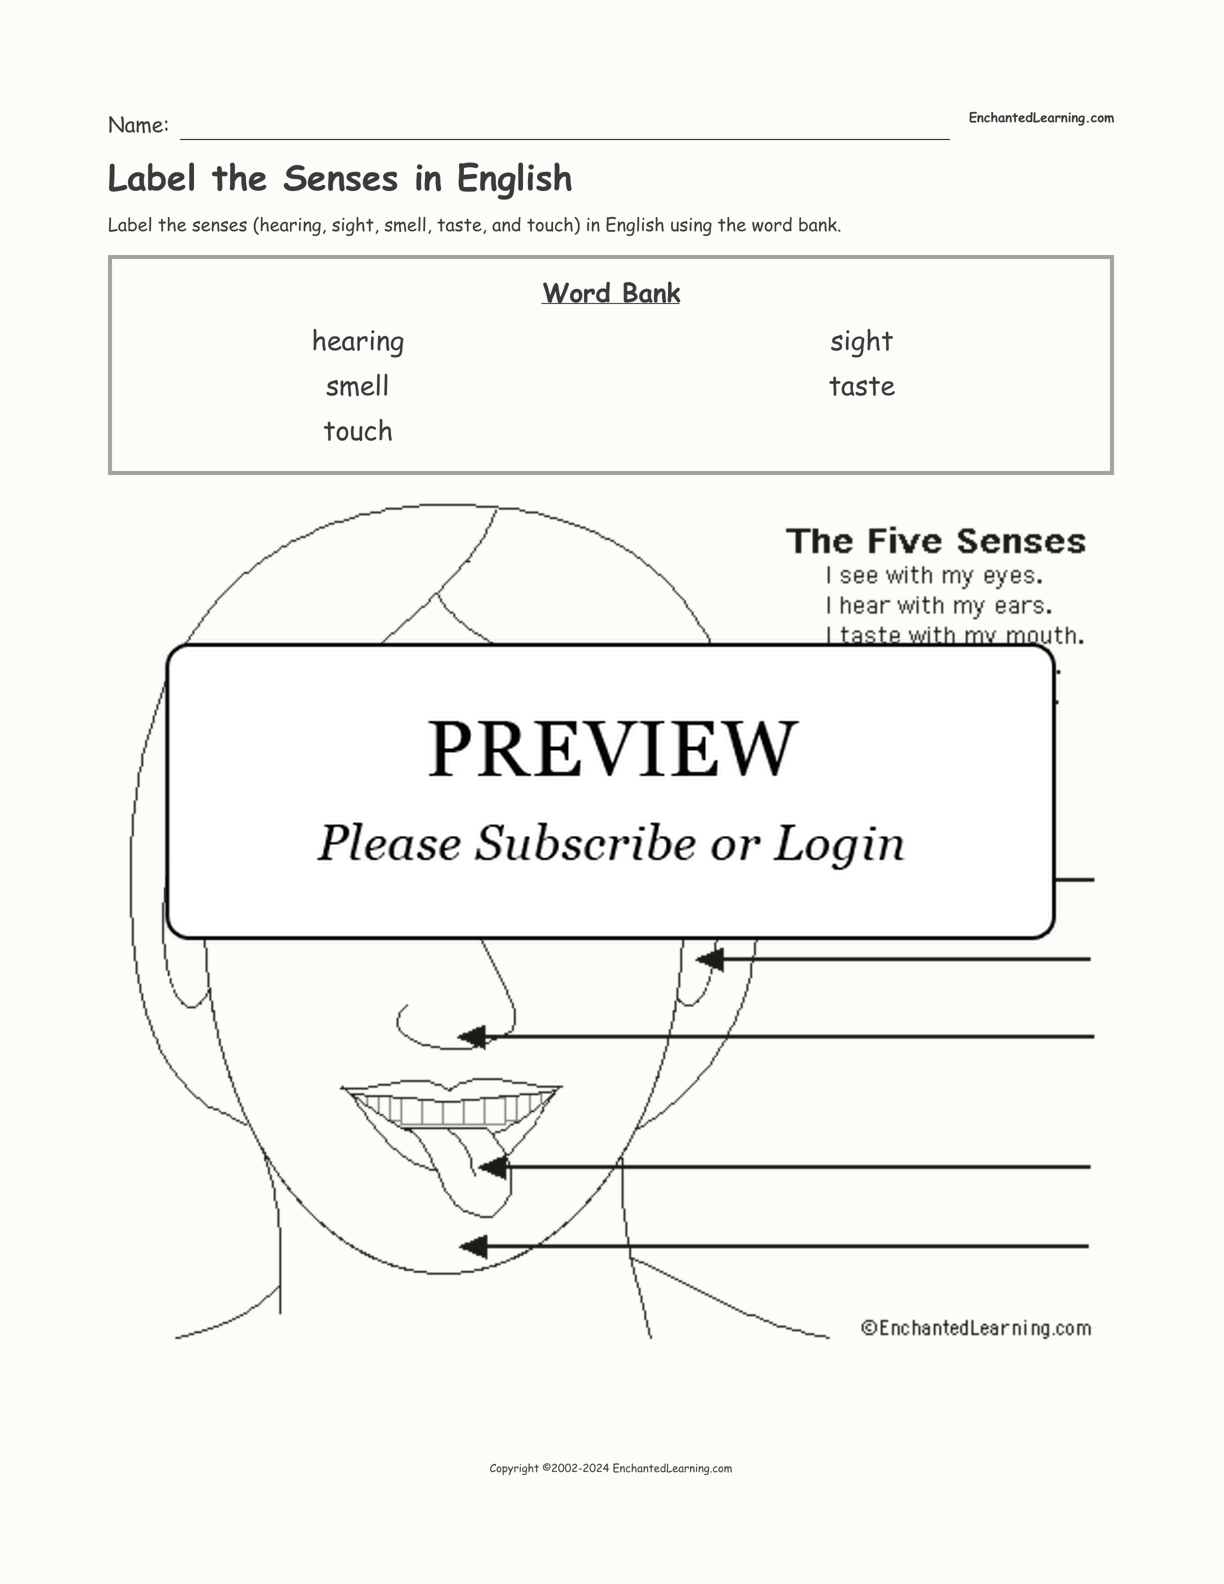 Label the Senses in English interactive worksheet page 1